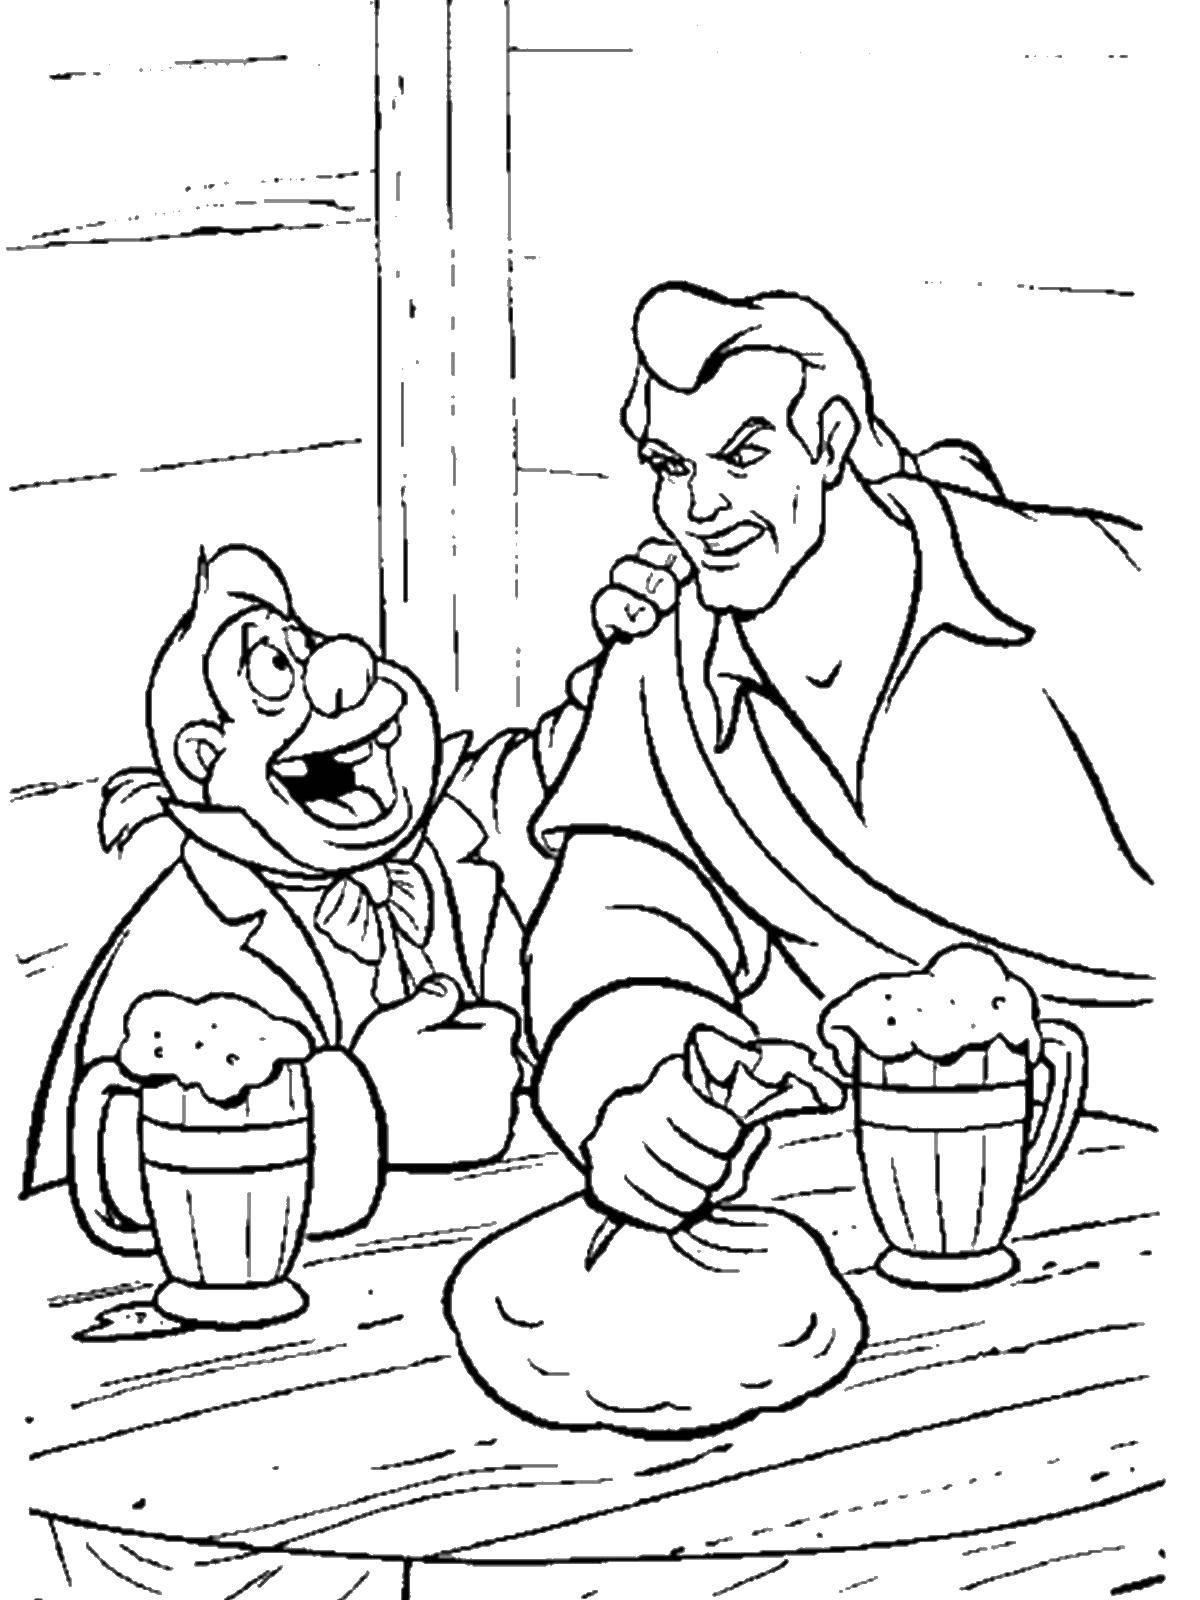 Coloring Gaston drinks beer. Category beauty and the beast. Tags:  beautiful , monster.